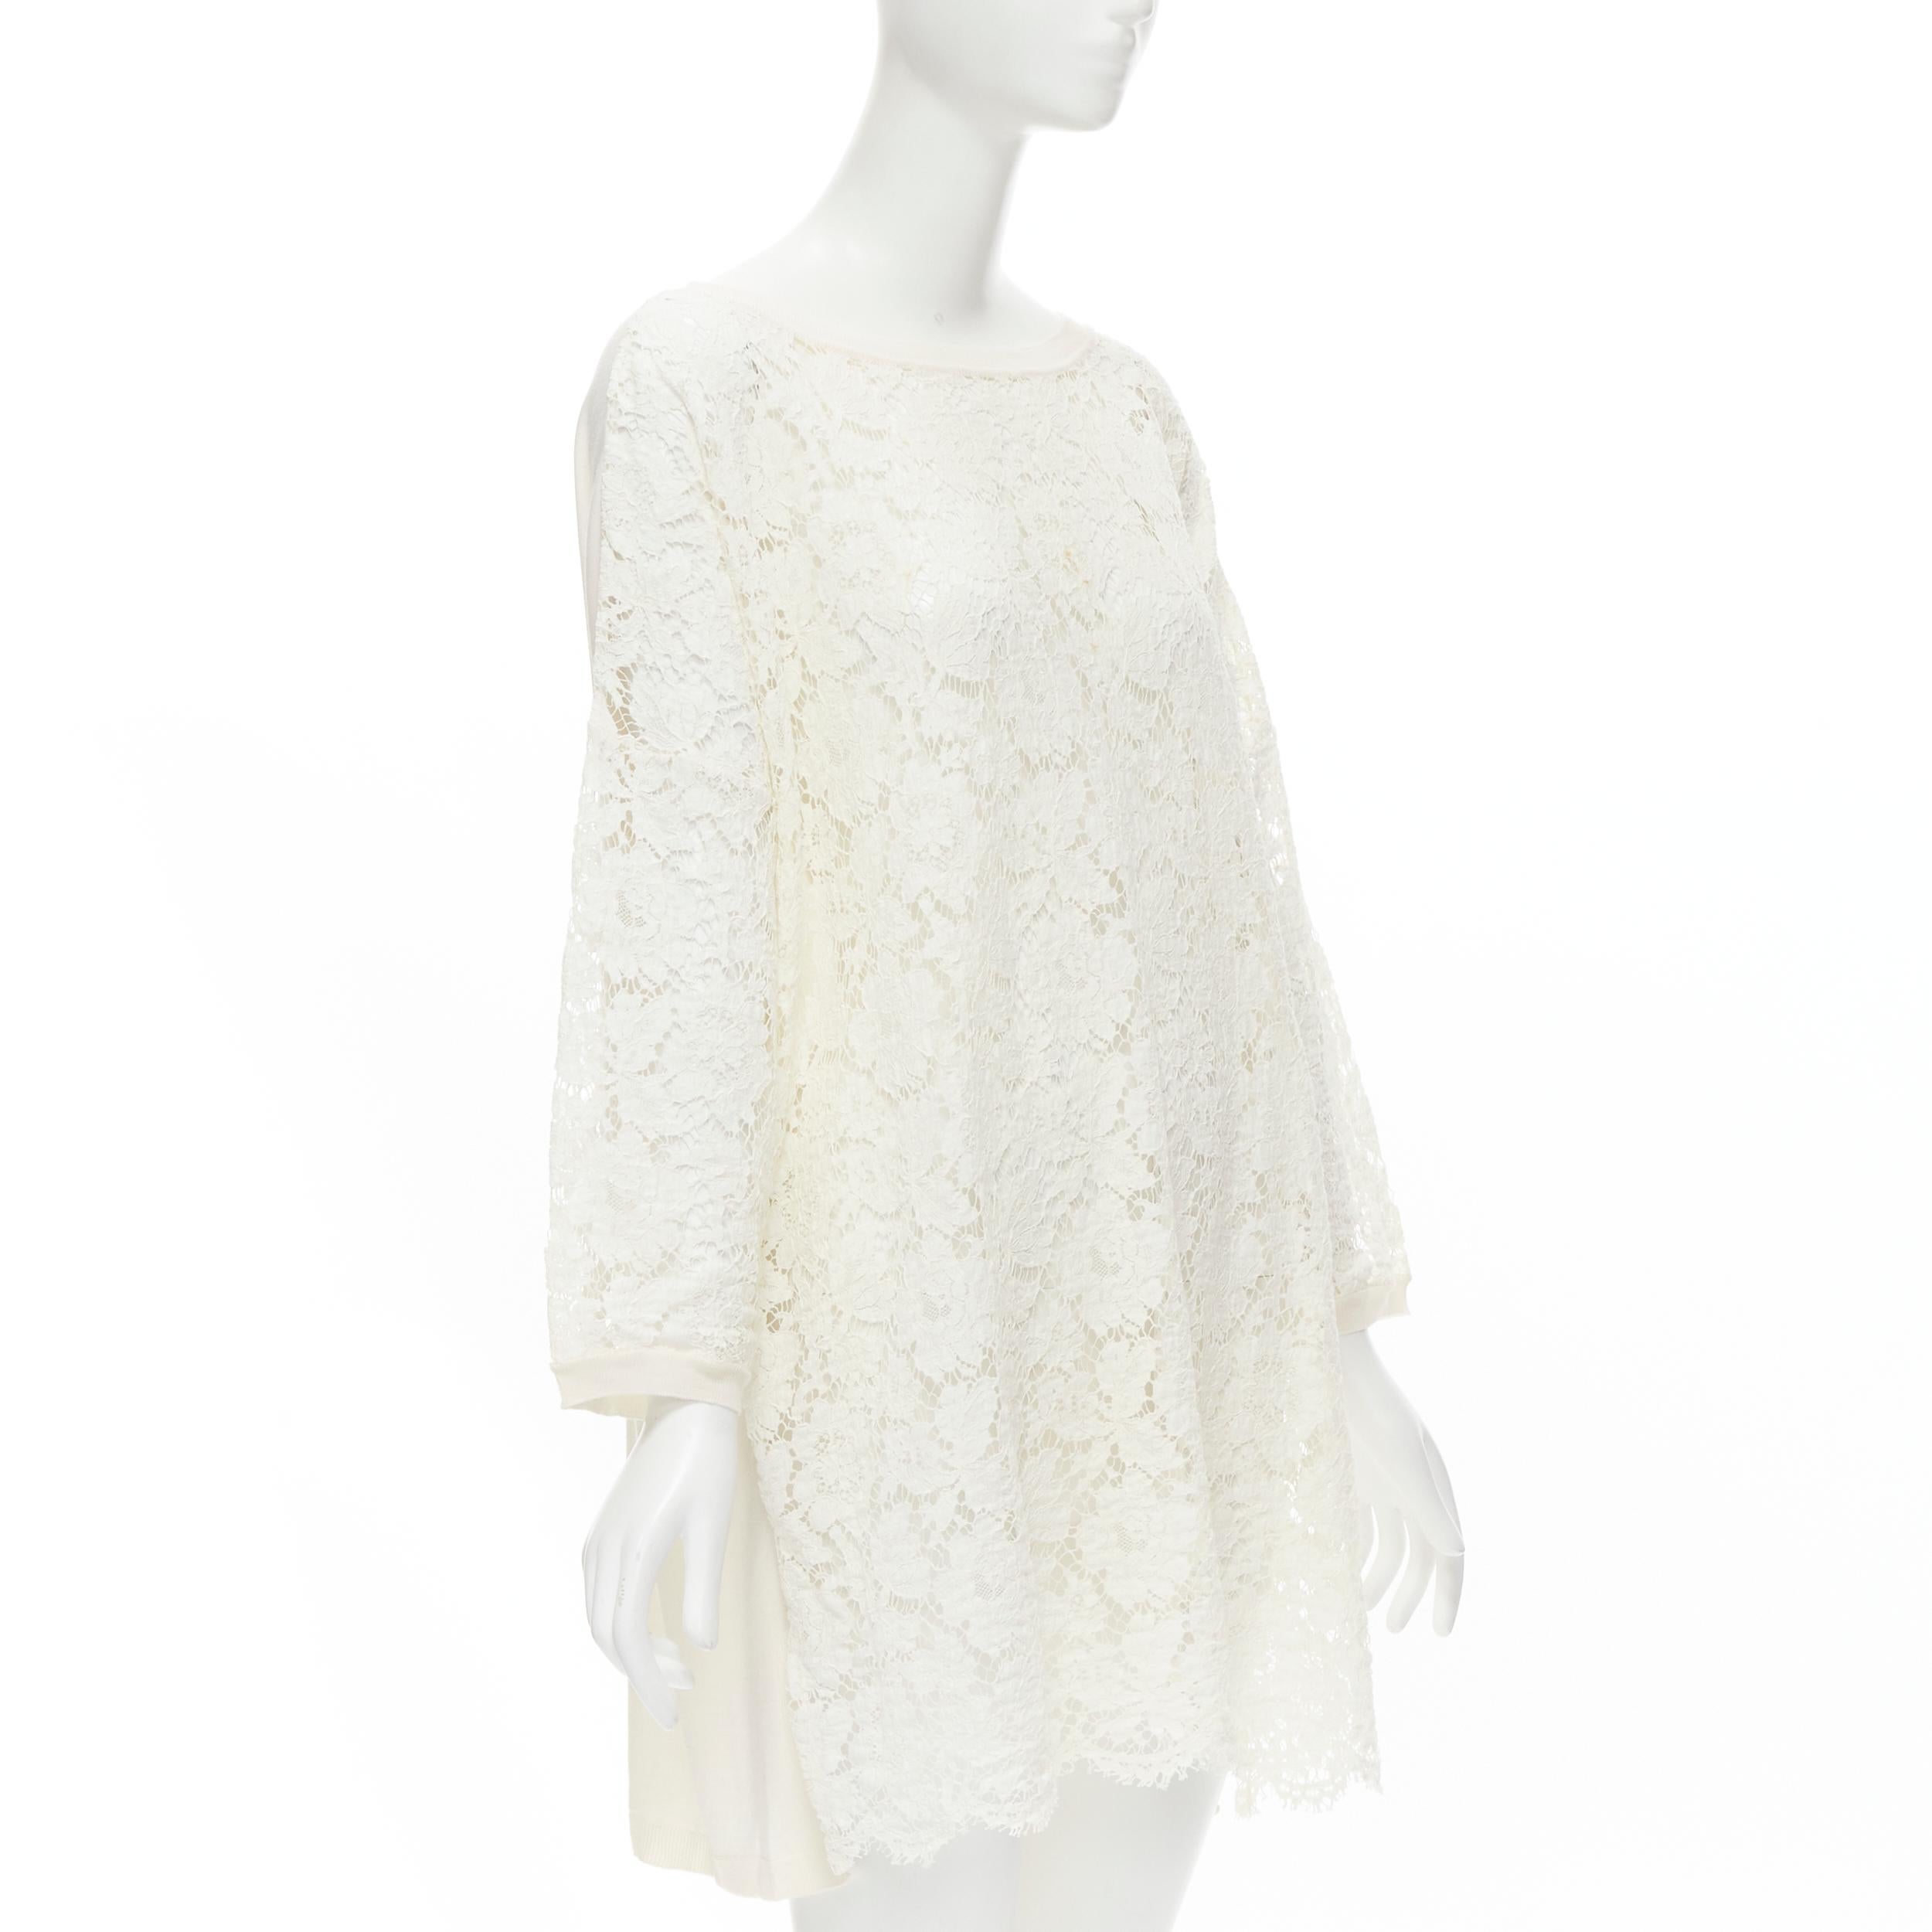 Beige VALENTINO cream floral lace front wool silk cashmere knit back casual dress 